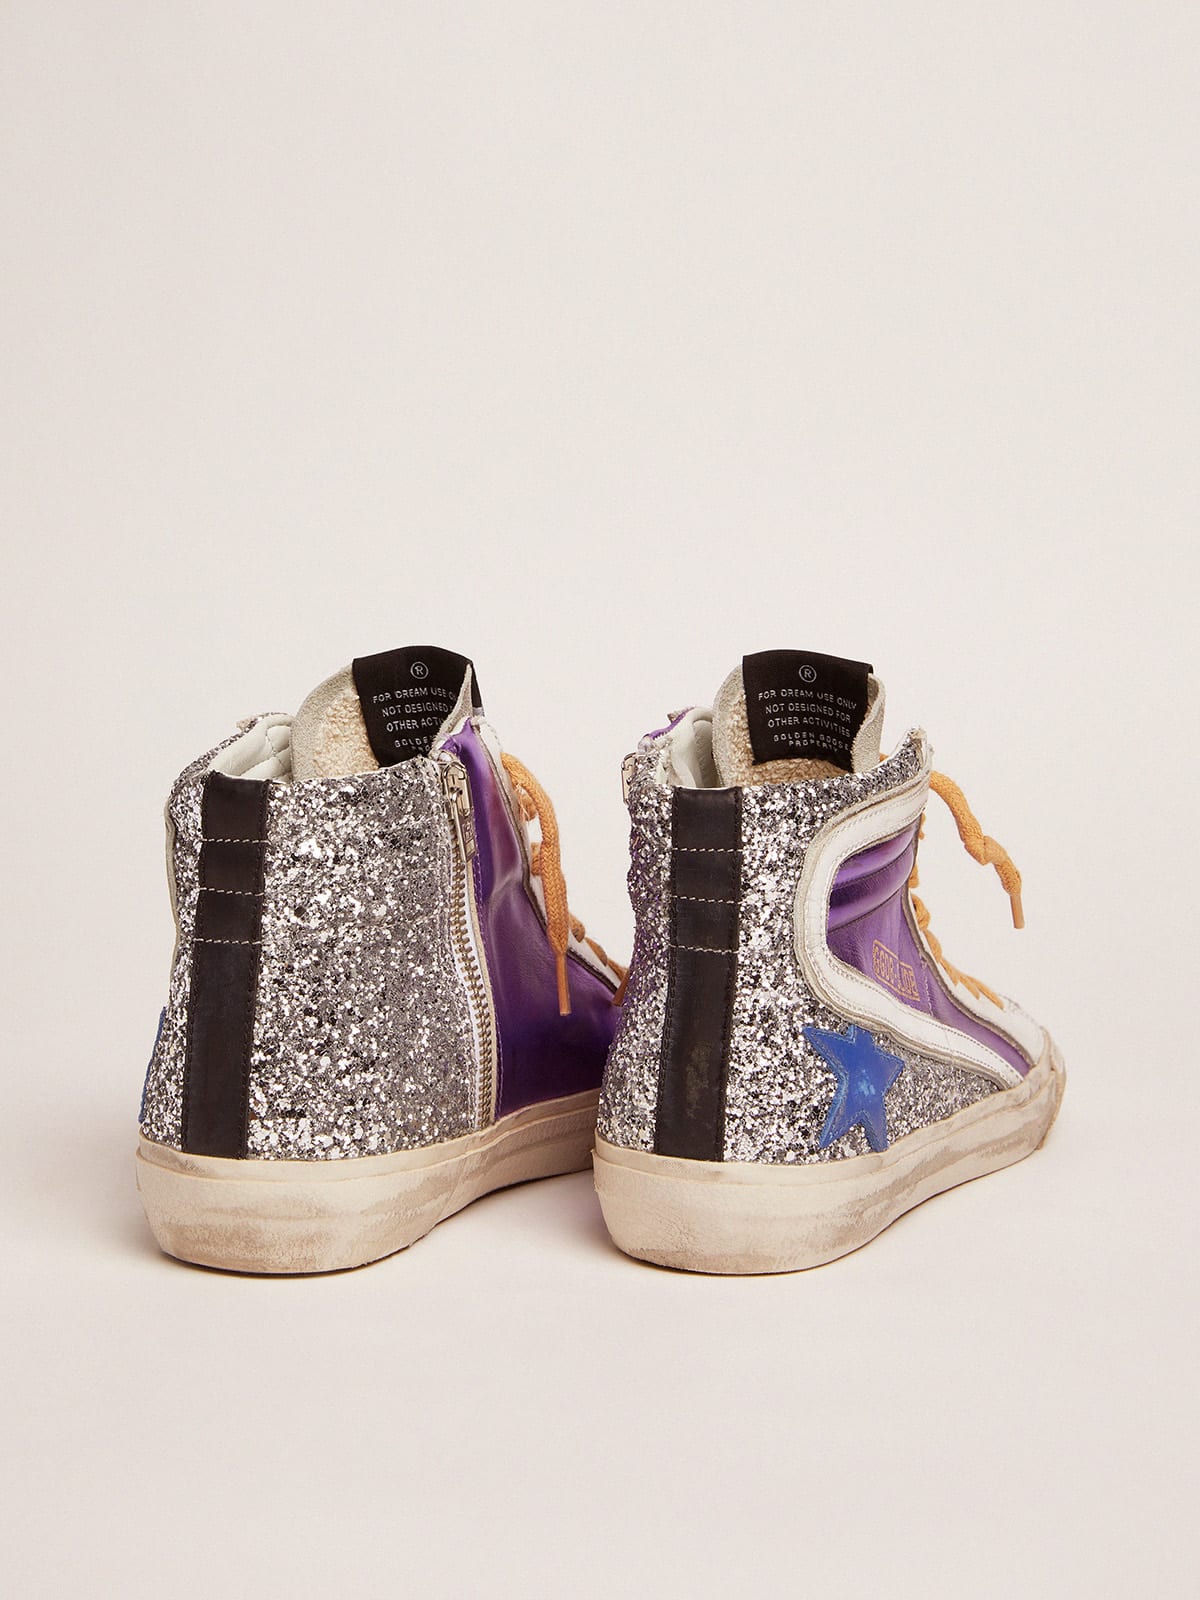 Slide sneakers with silver glitter and purple laminated leather upper